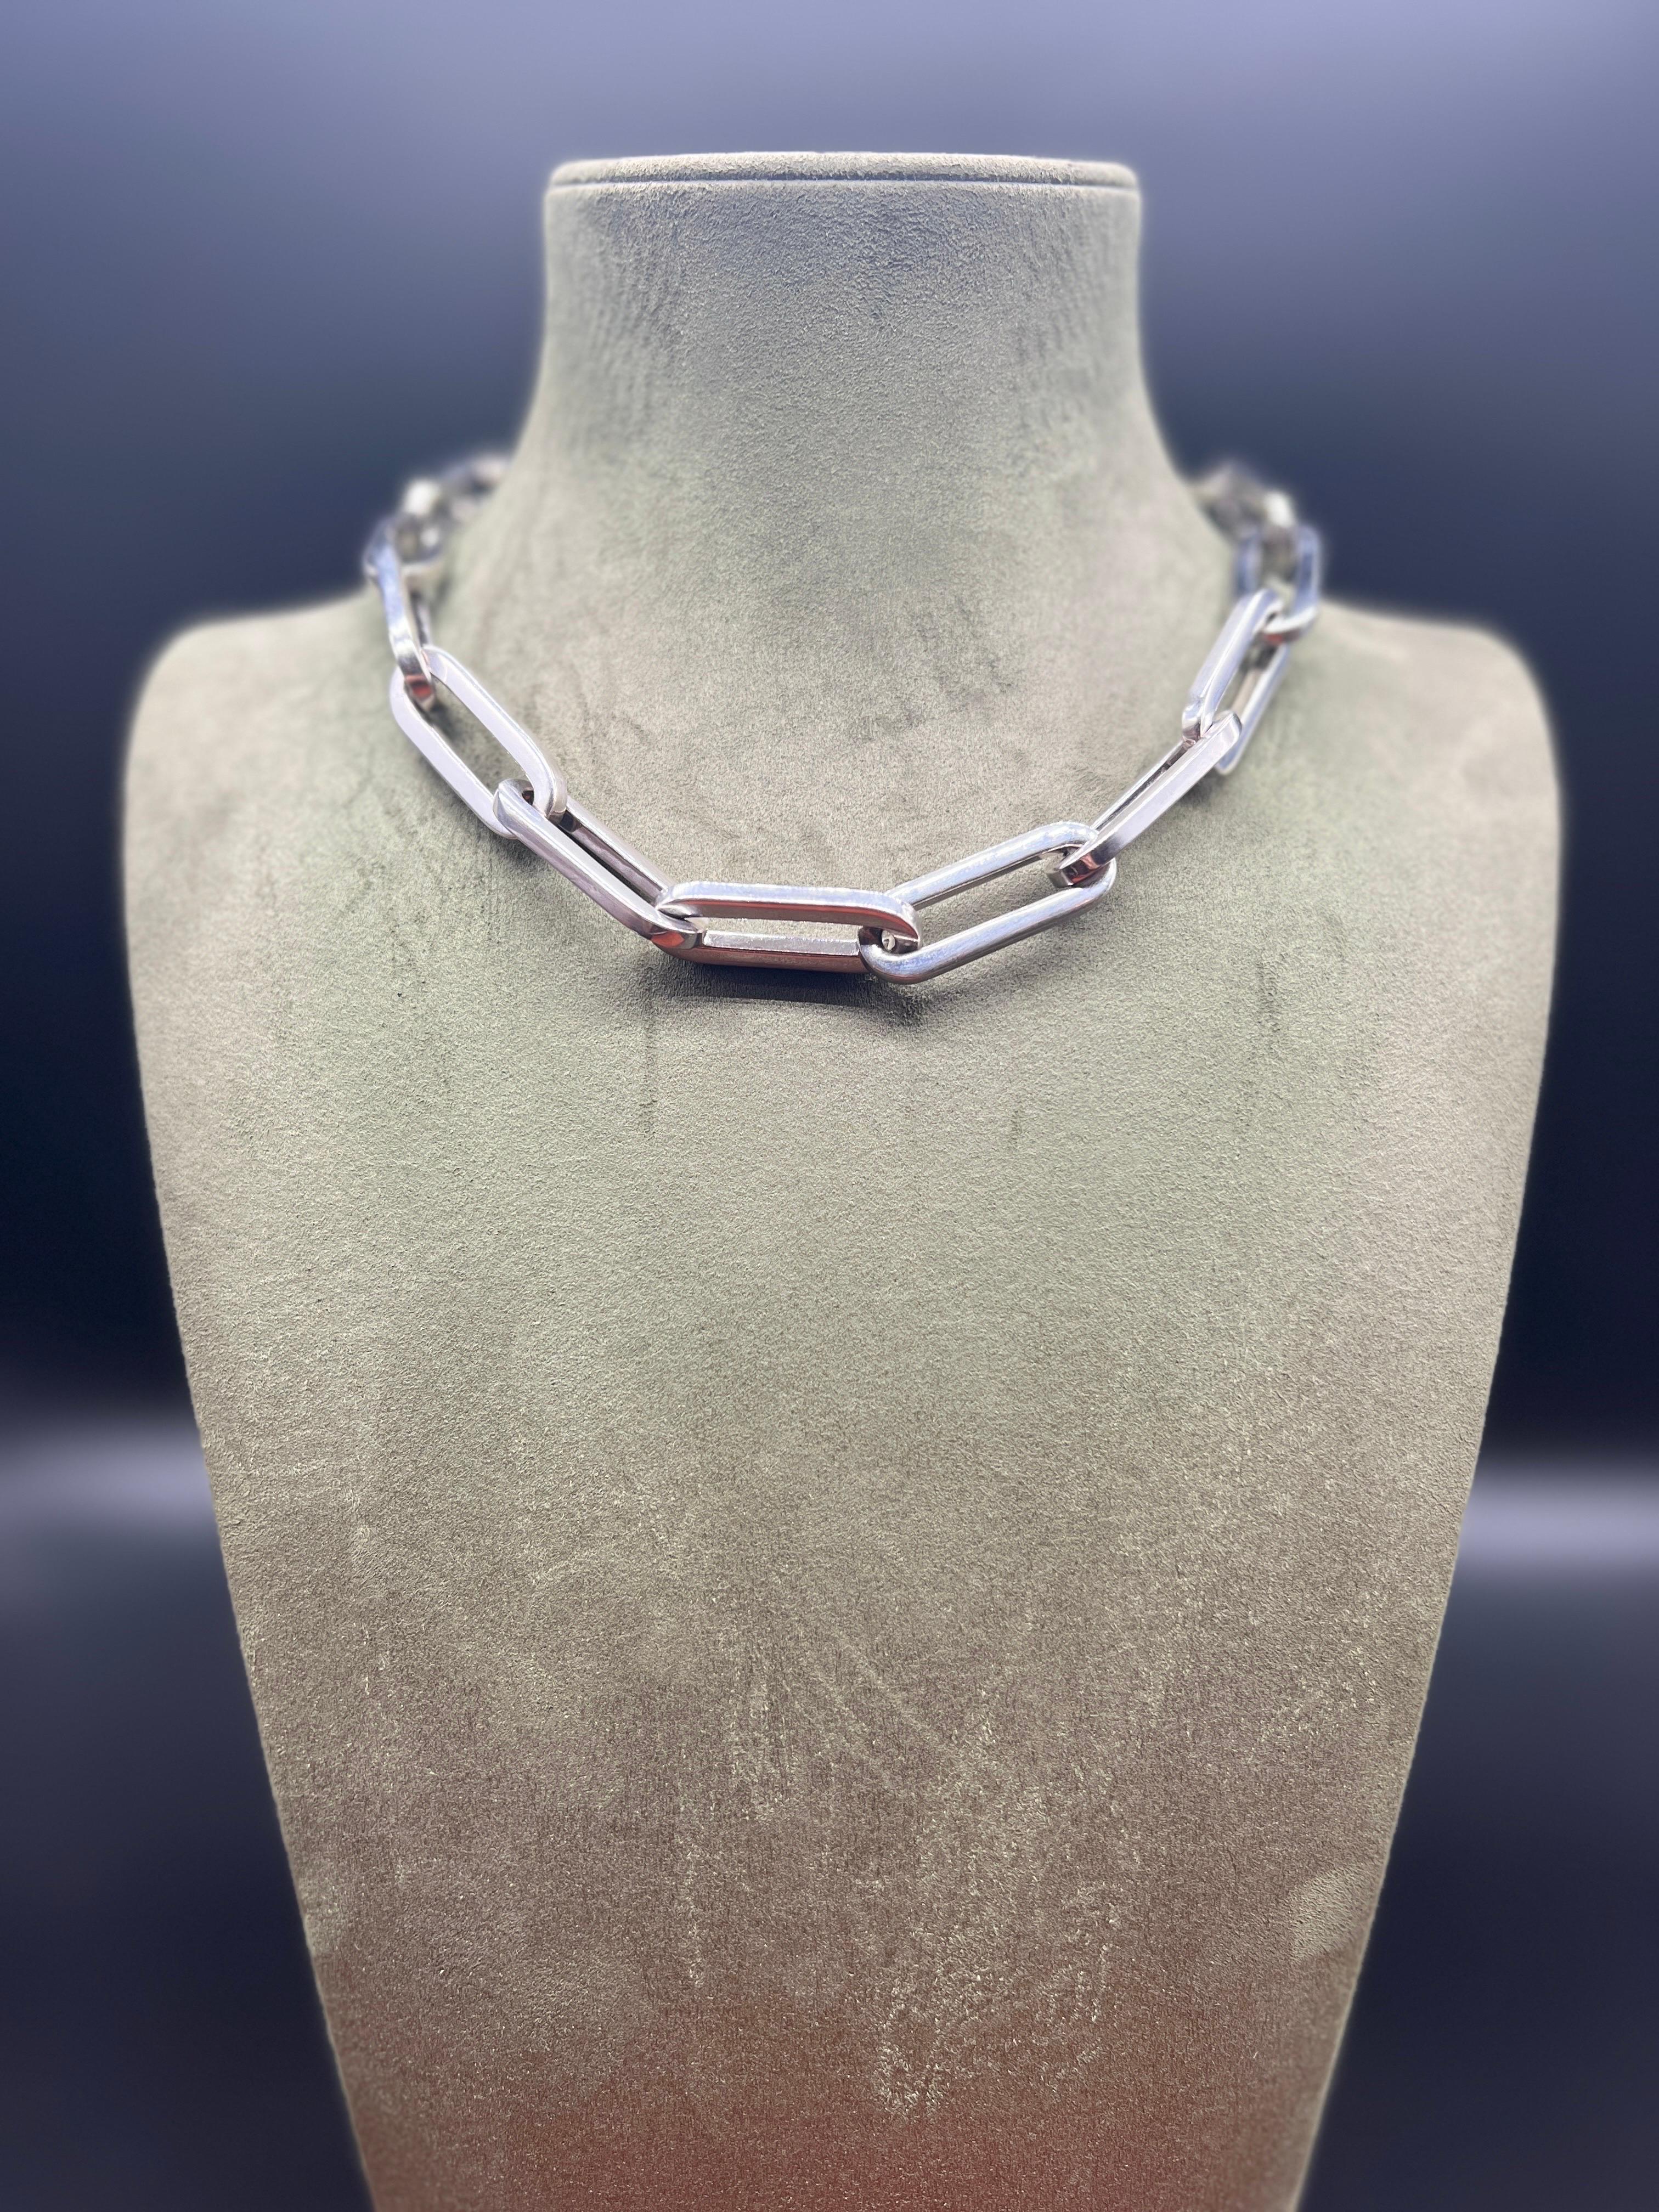 Discover this elegant 925/1000 silver chain, perfect for enhancing your style. Made with exceptional craftsmanship, this chain features unique paperclip links that add a modern, refined aesthetic to your look. The real highlight of this chain is its